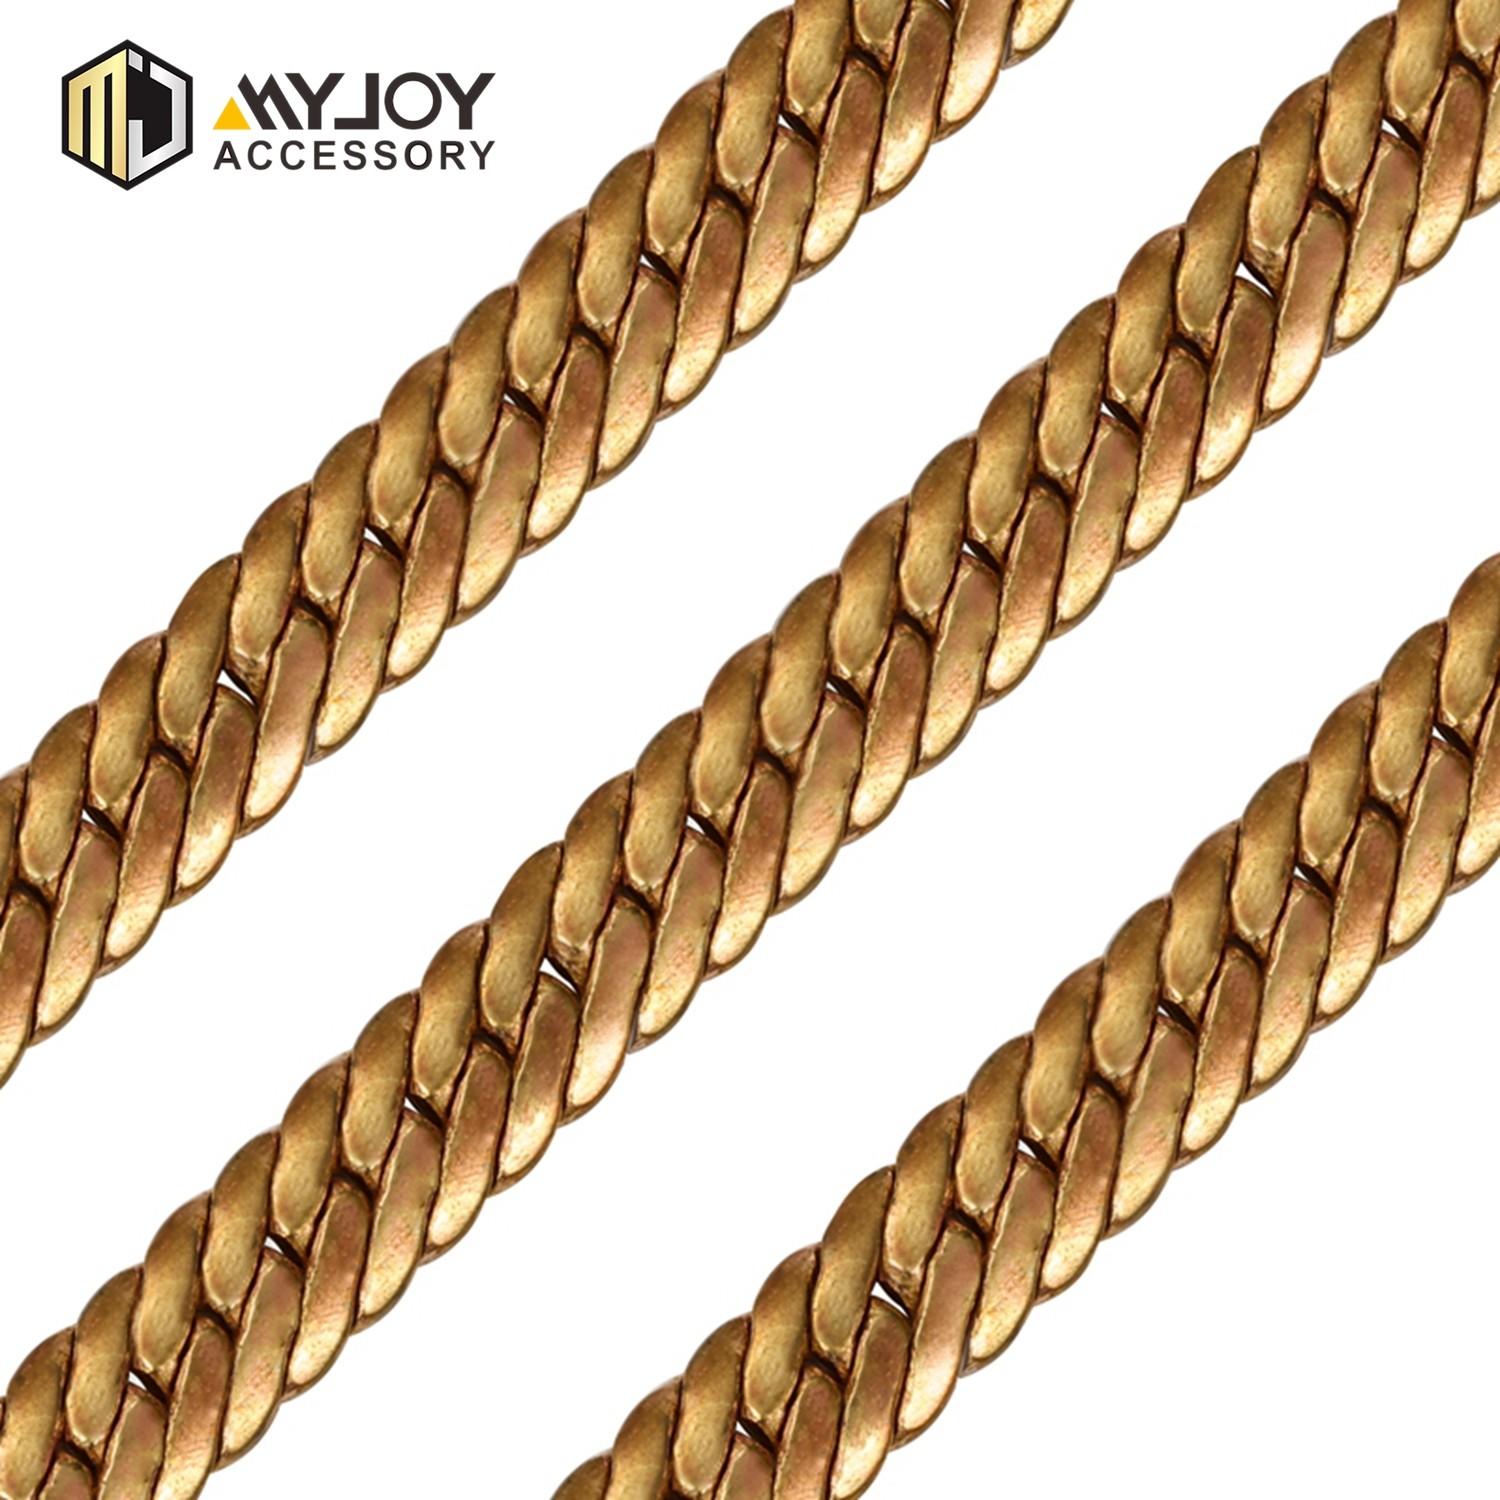 MYJOY highquality strap chain for business for bags-3